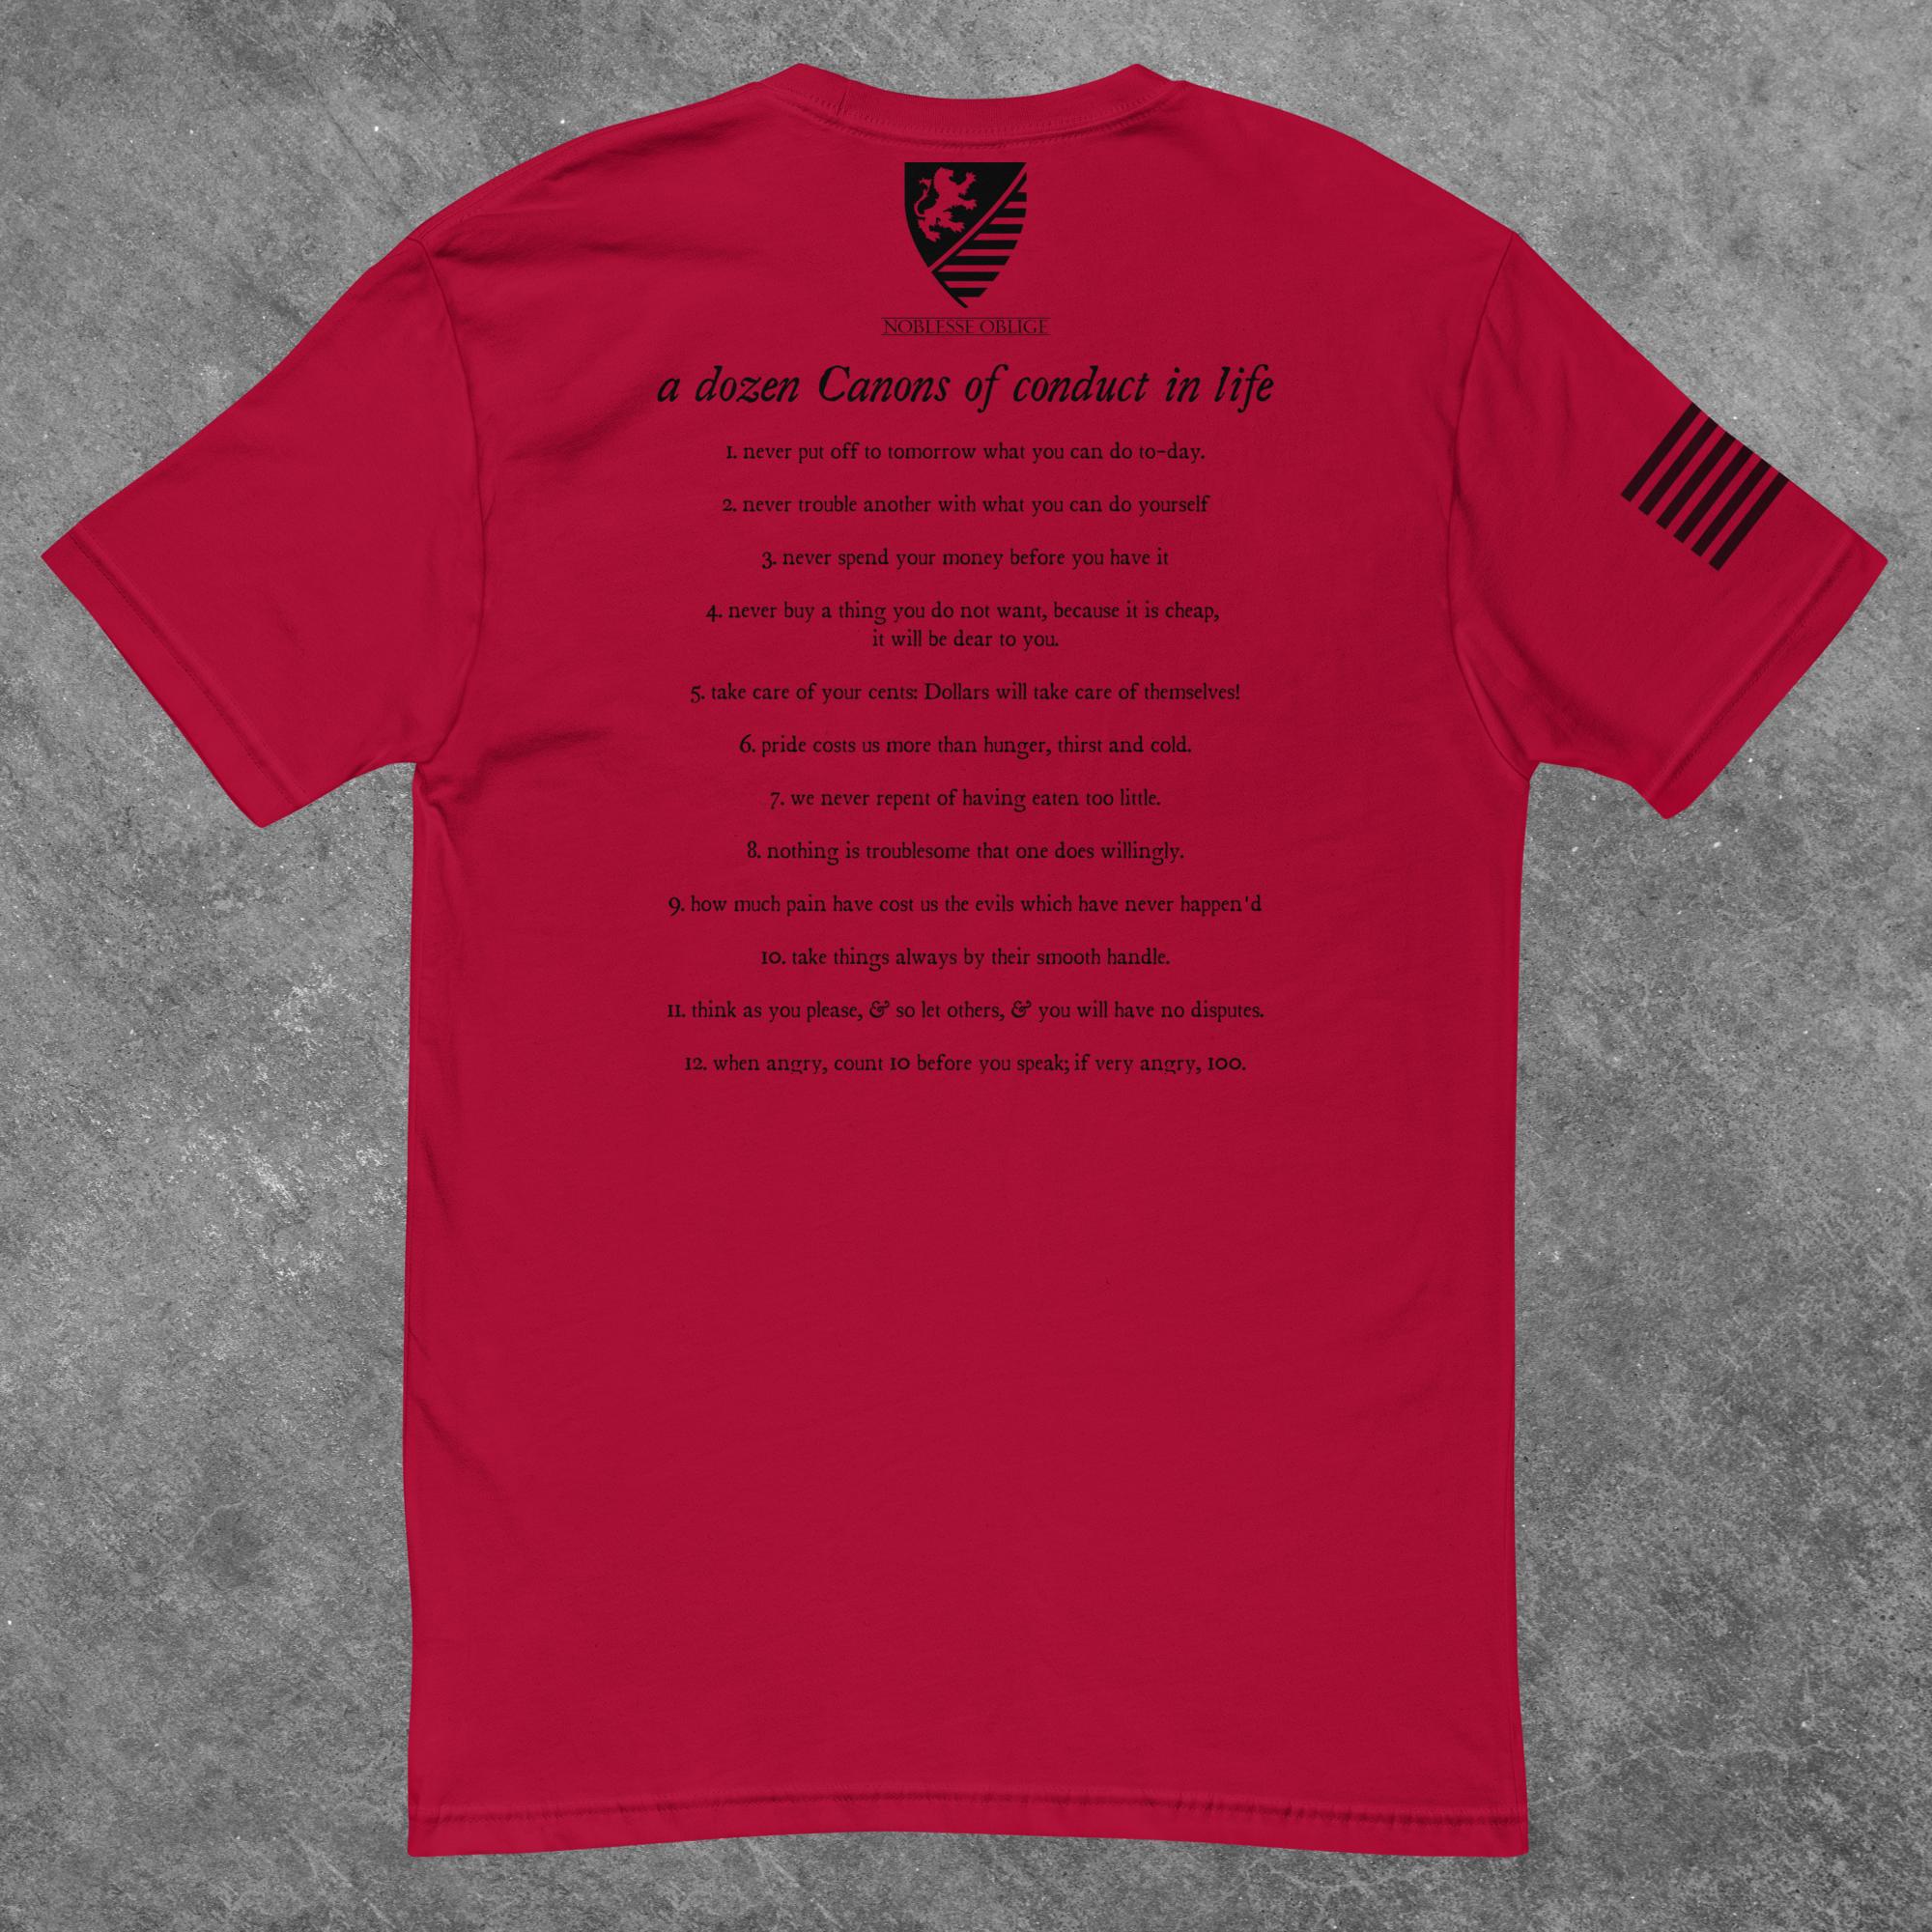 Jefferson's 12 Canons of Conduct - Men's Fitted T-Shirt - Noblesse Oblige Apparel